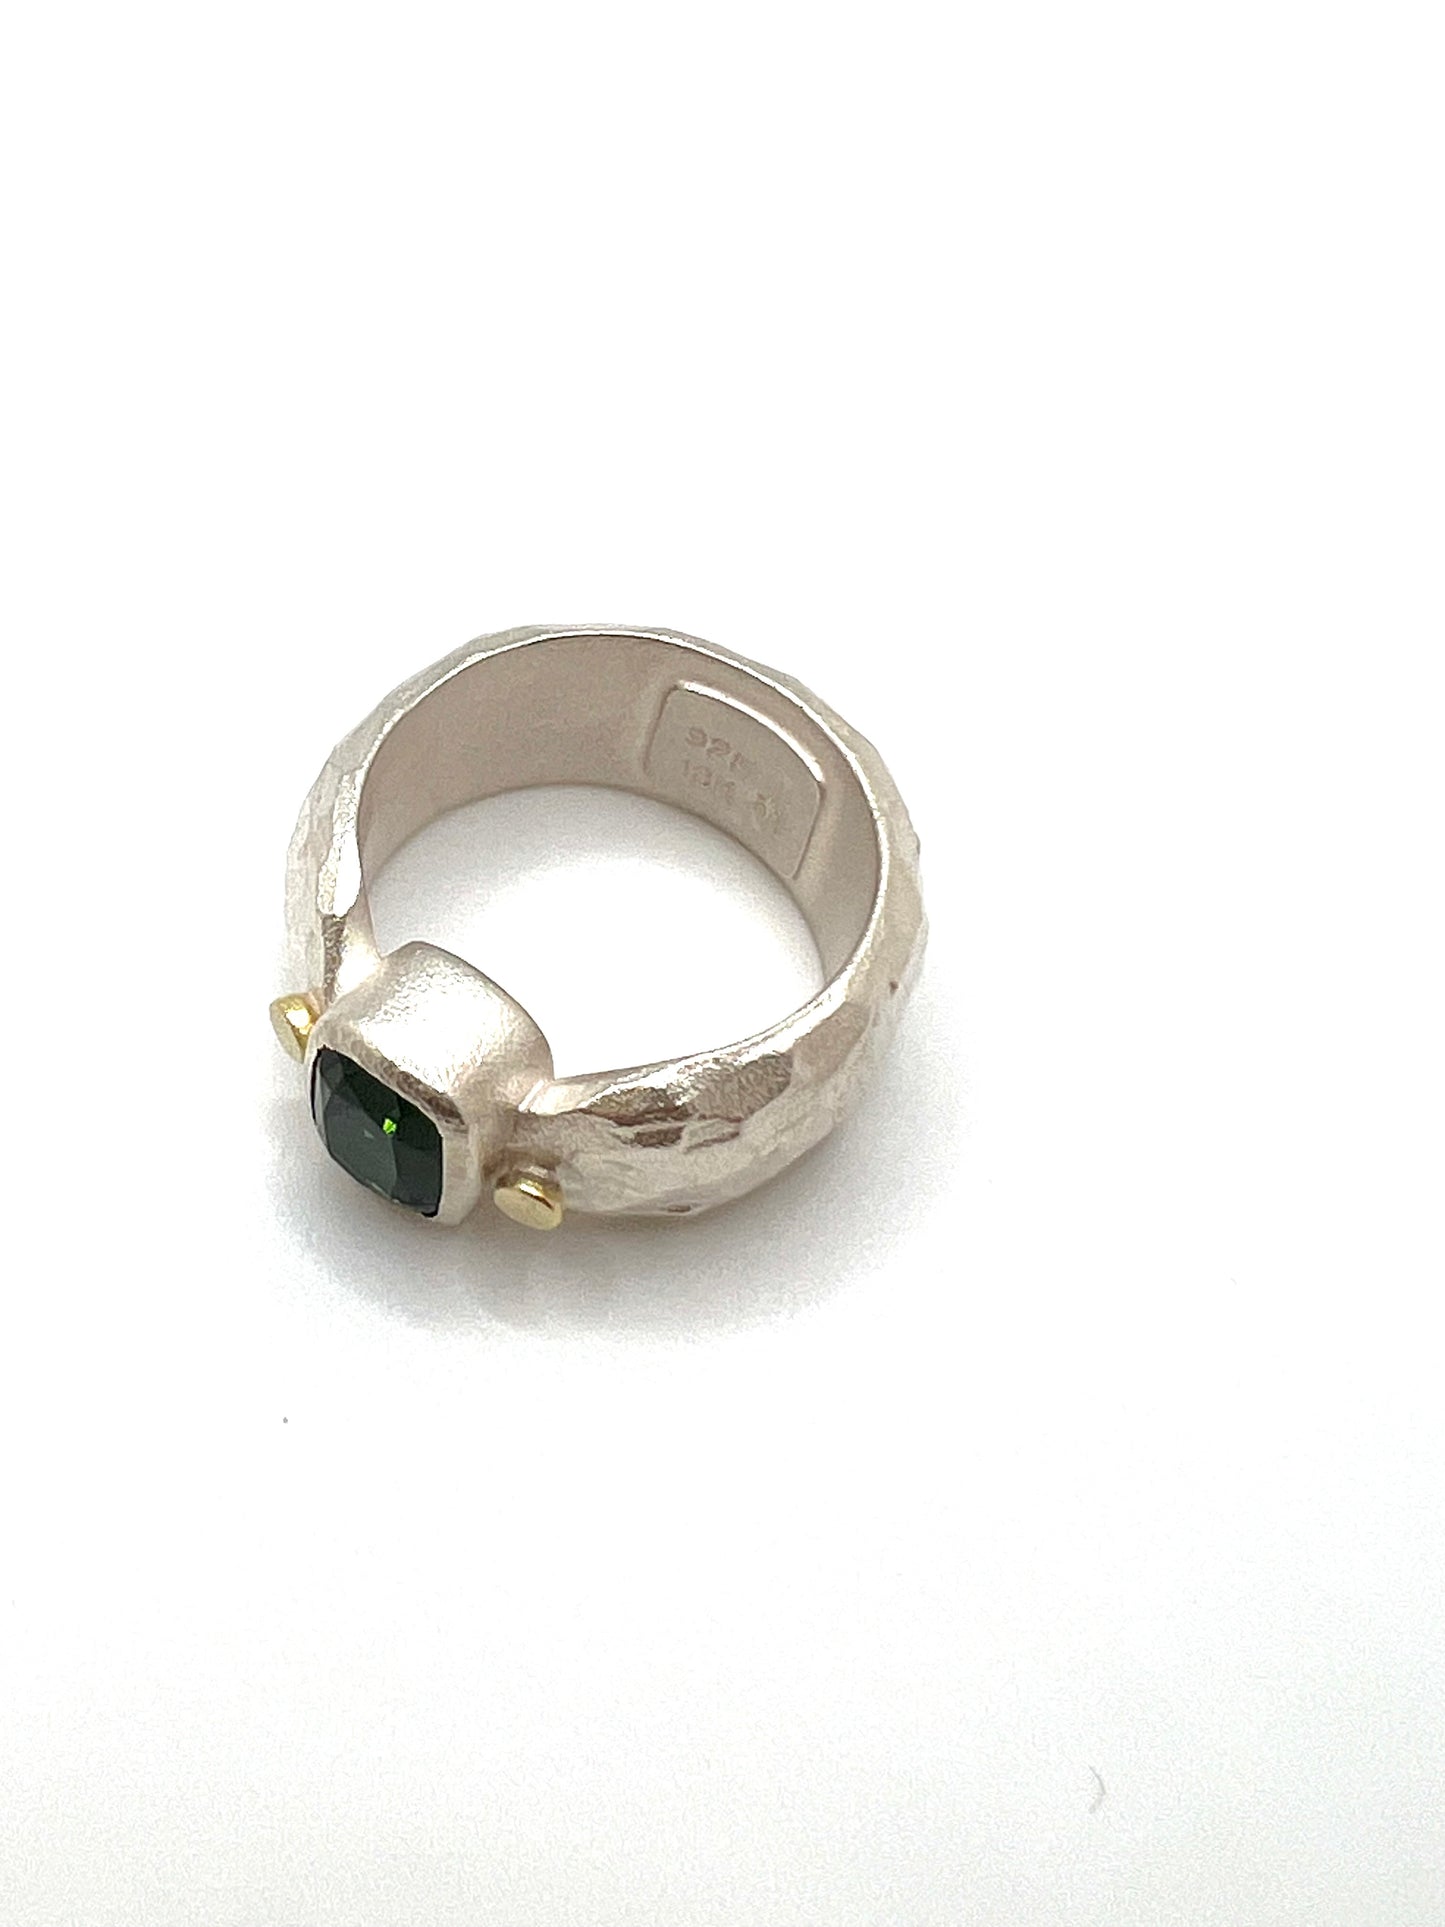 Bowtie Ring, Sterling Silver,18kt Gold, Green Tourmaline.